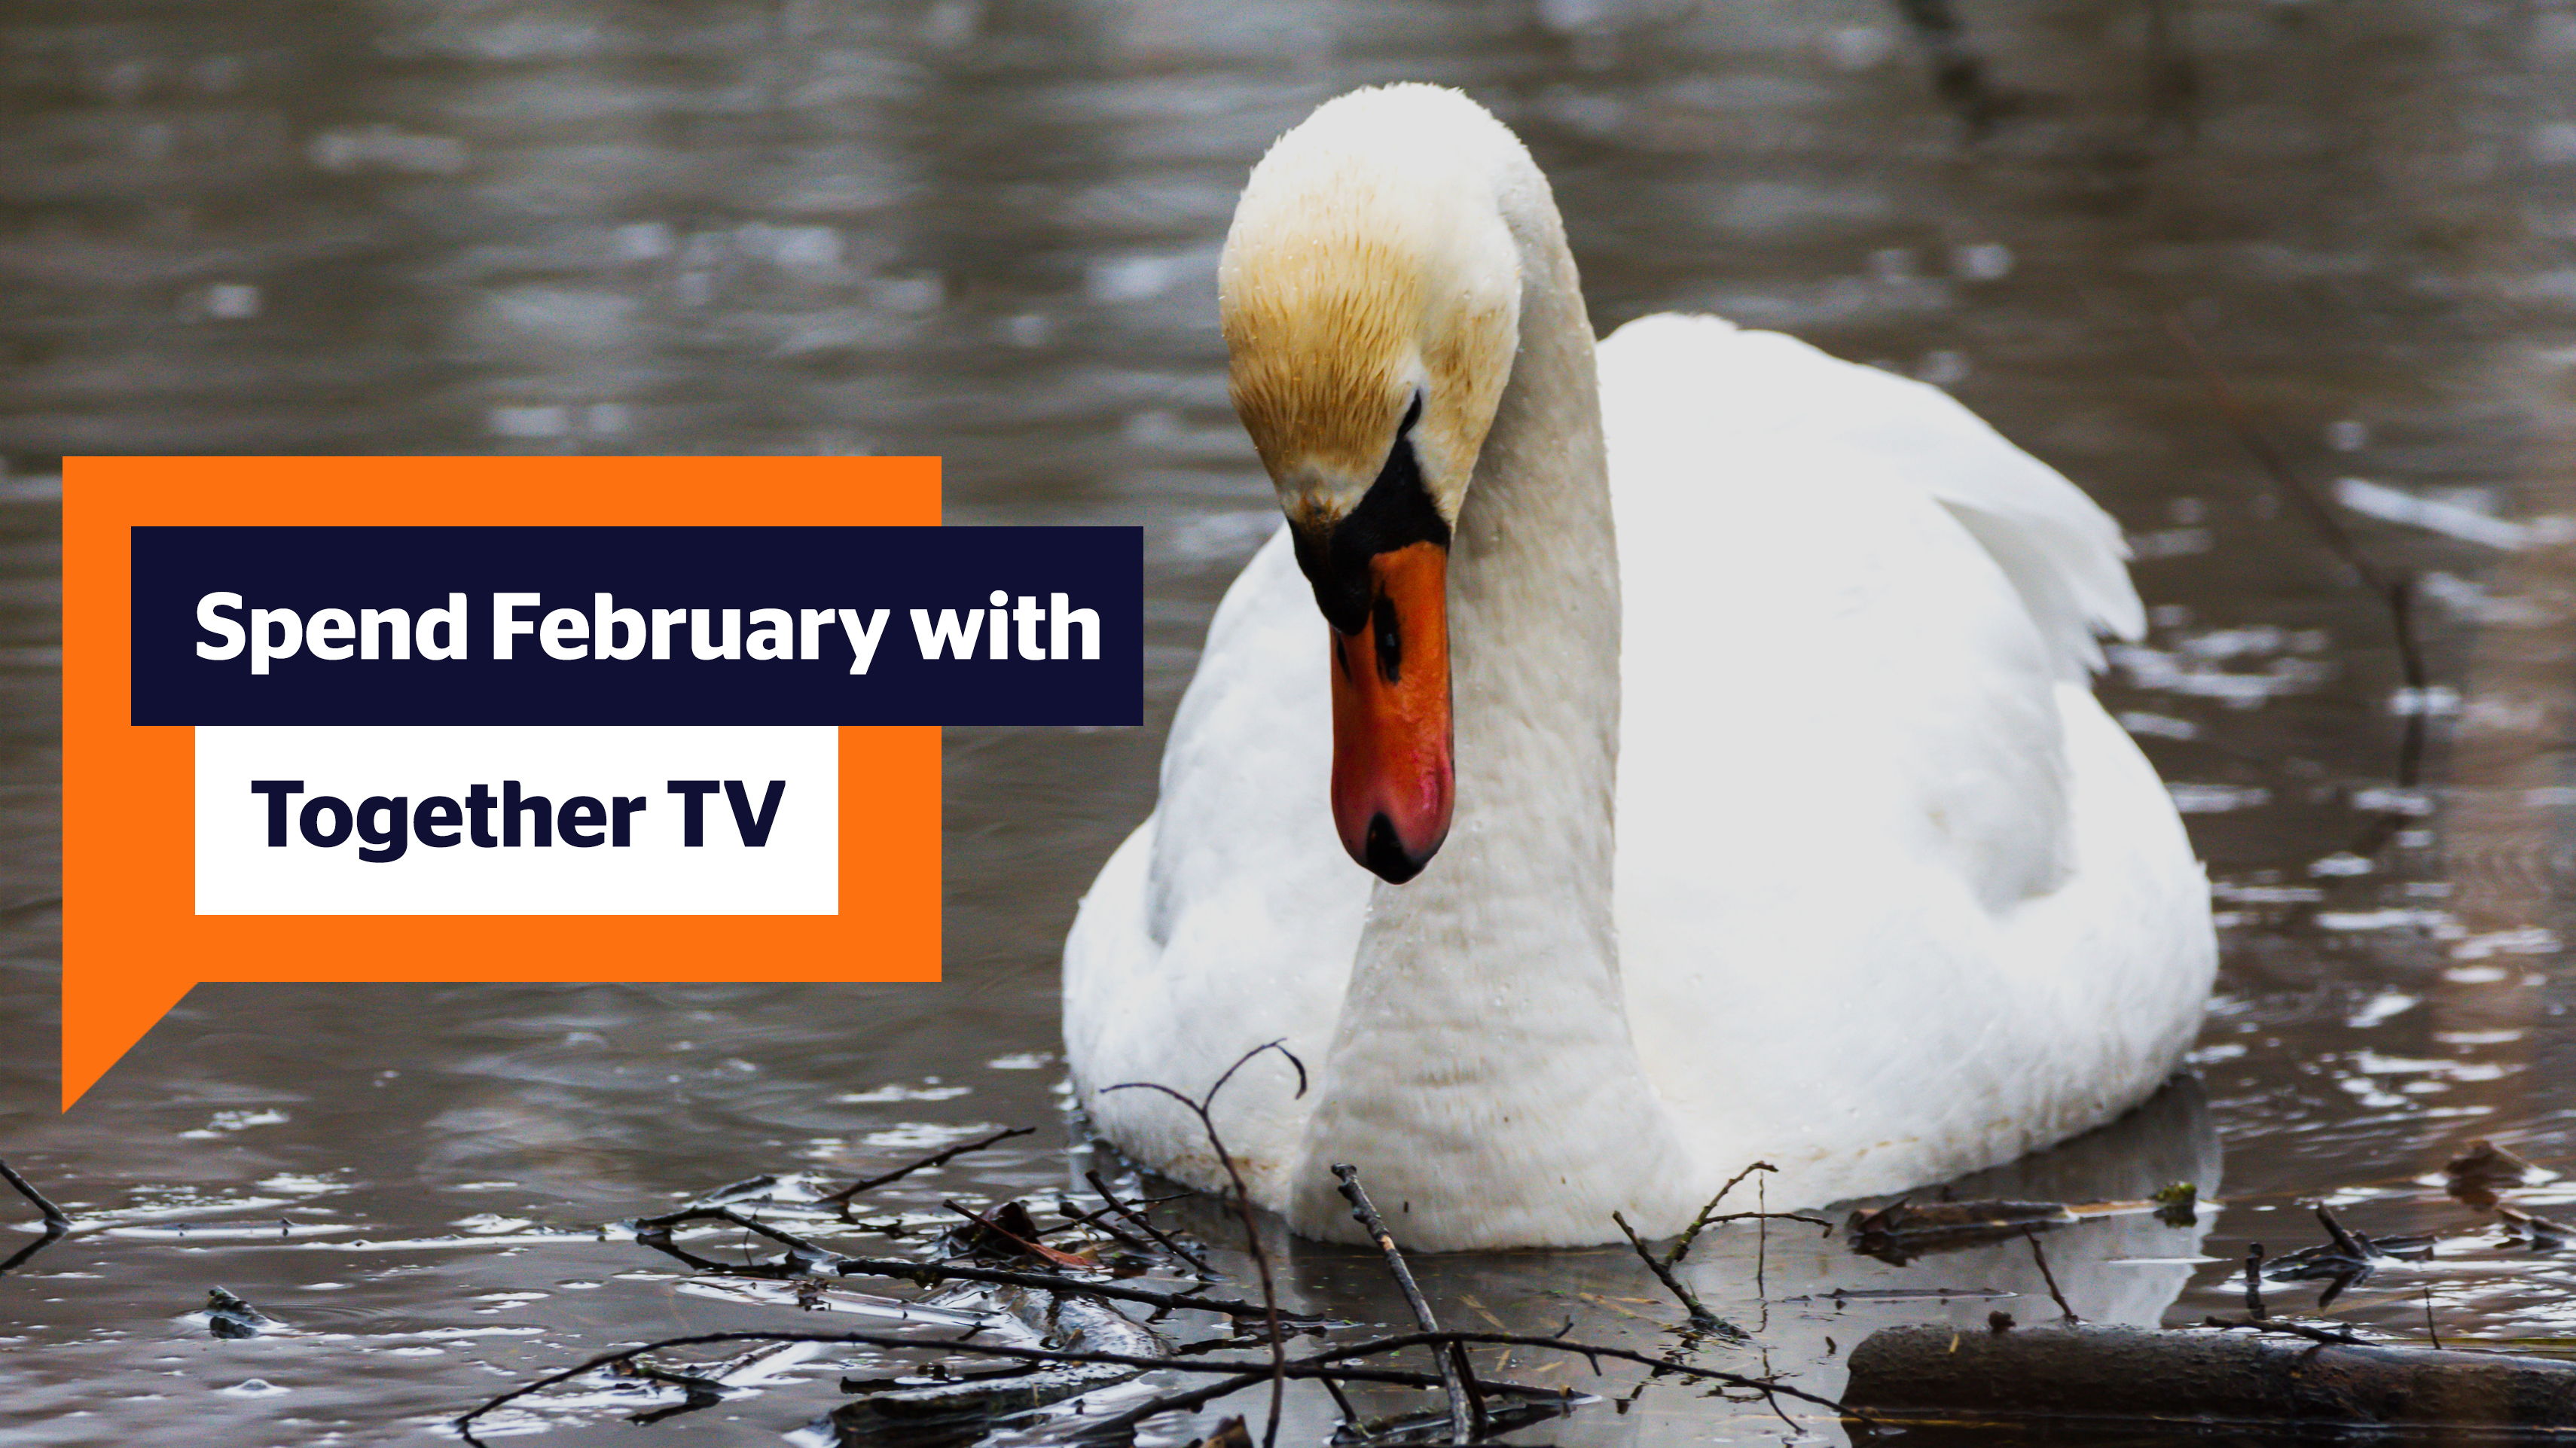 Swan. Spend February with Together TV